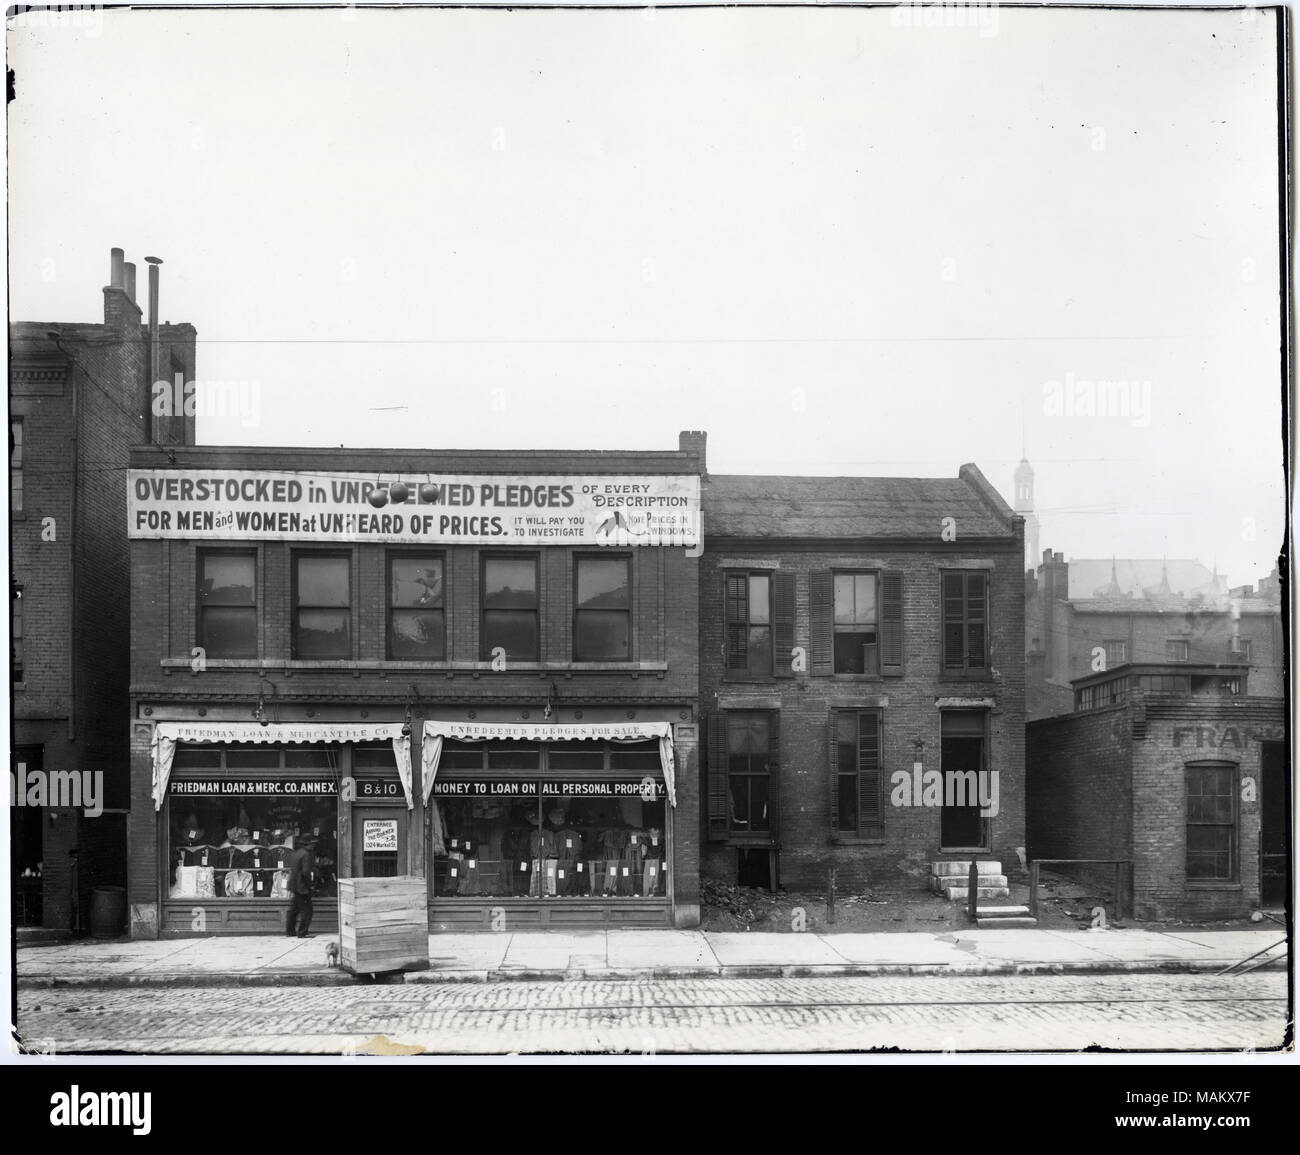 Horizontal, Black and white photograph of a two story brick commercial and residential building. Advertisements for Friedman Loan and Mercantile Company are placed at the top of the building and above the display windows. A decorative molding is above the display windows which showcase multiple items of clothing. A wooden crate is out front on the sidewalk with a dog standing next to it and a man is on the sidewalk. The second building is a two story brick building with shutters around the windows. The road is paved of brick. Title: Fourteenth (8-10). Friedman Loan and Mercantile Company Annex Stock Photo